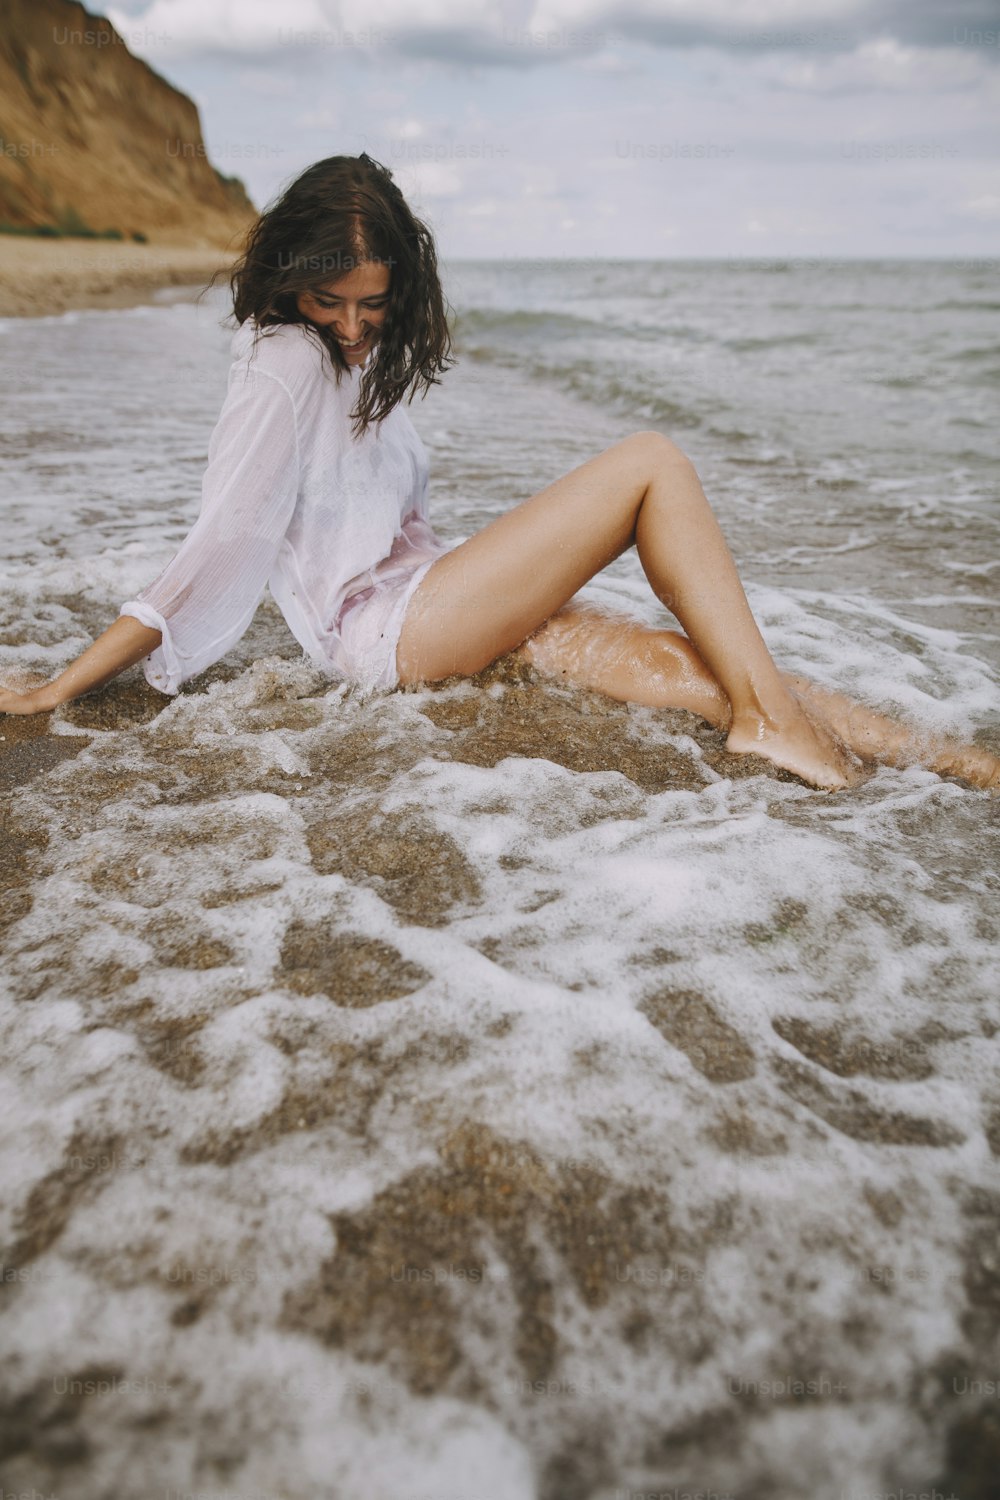 Happy  woman in white shirt sitting on beach in splashing waves. Stylish tanned girl relaxing on seashore and enjoying waves. Summer vacation. Mindfulness and carefree moment